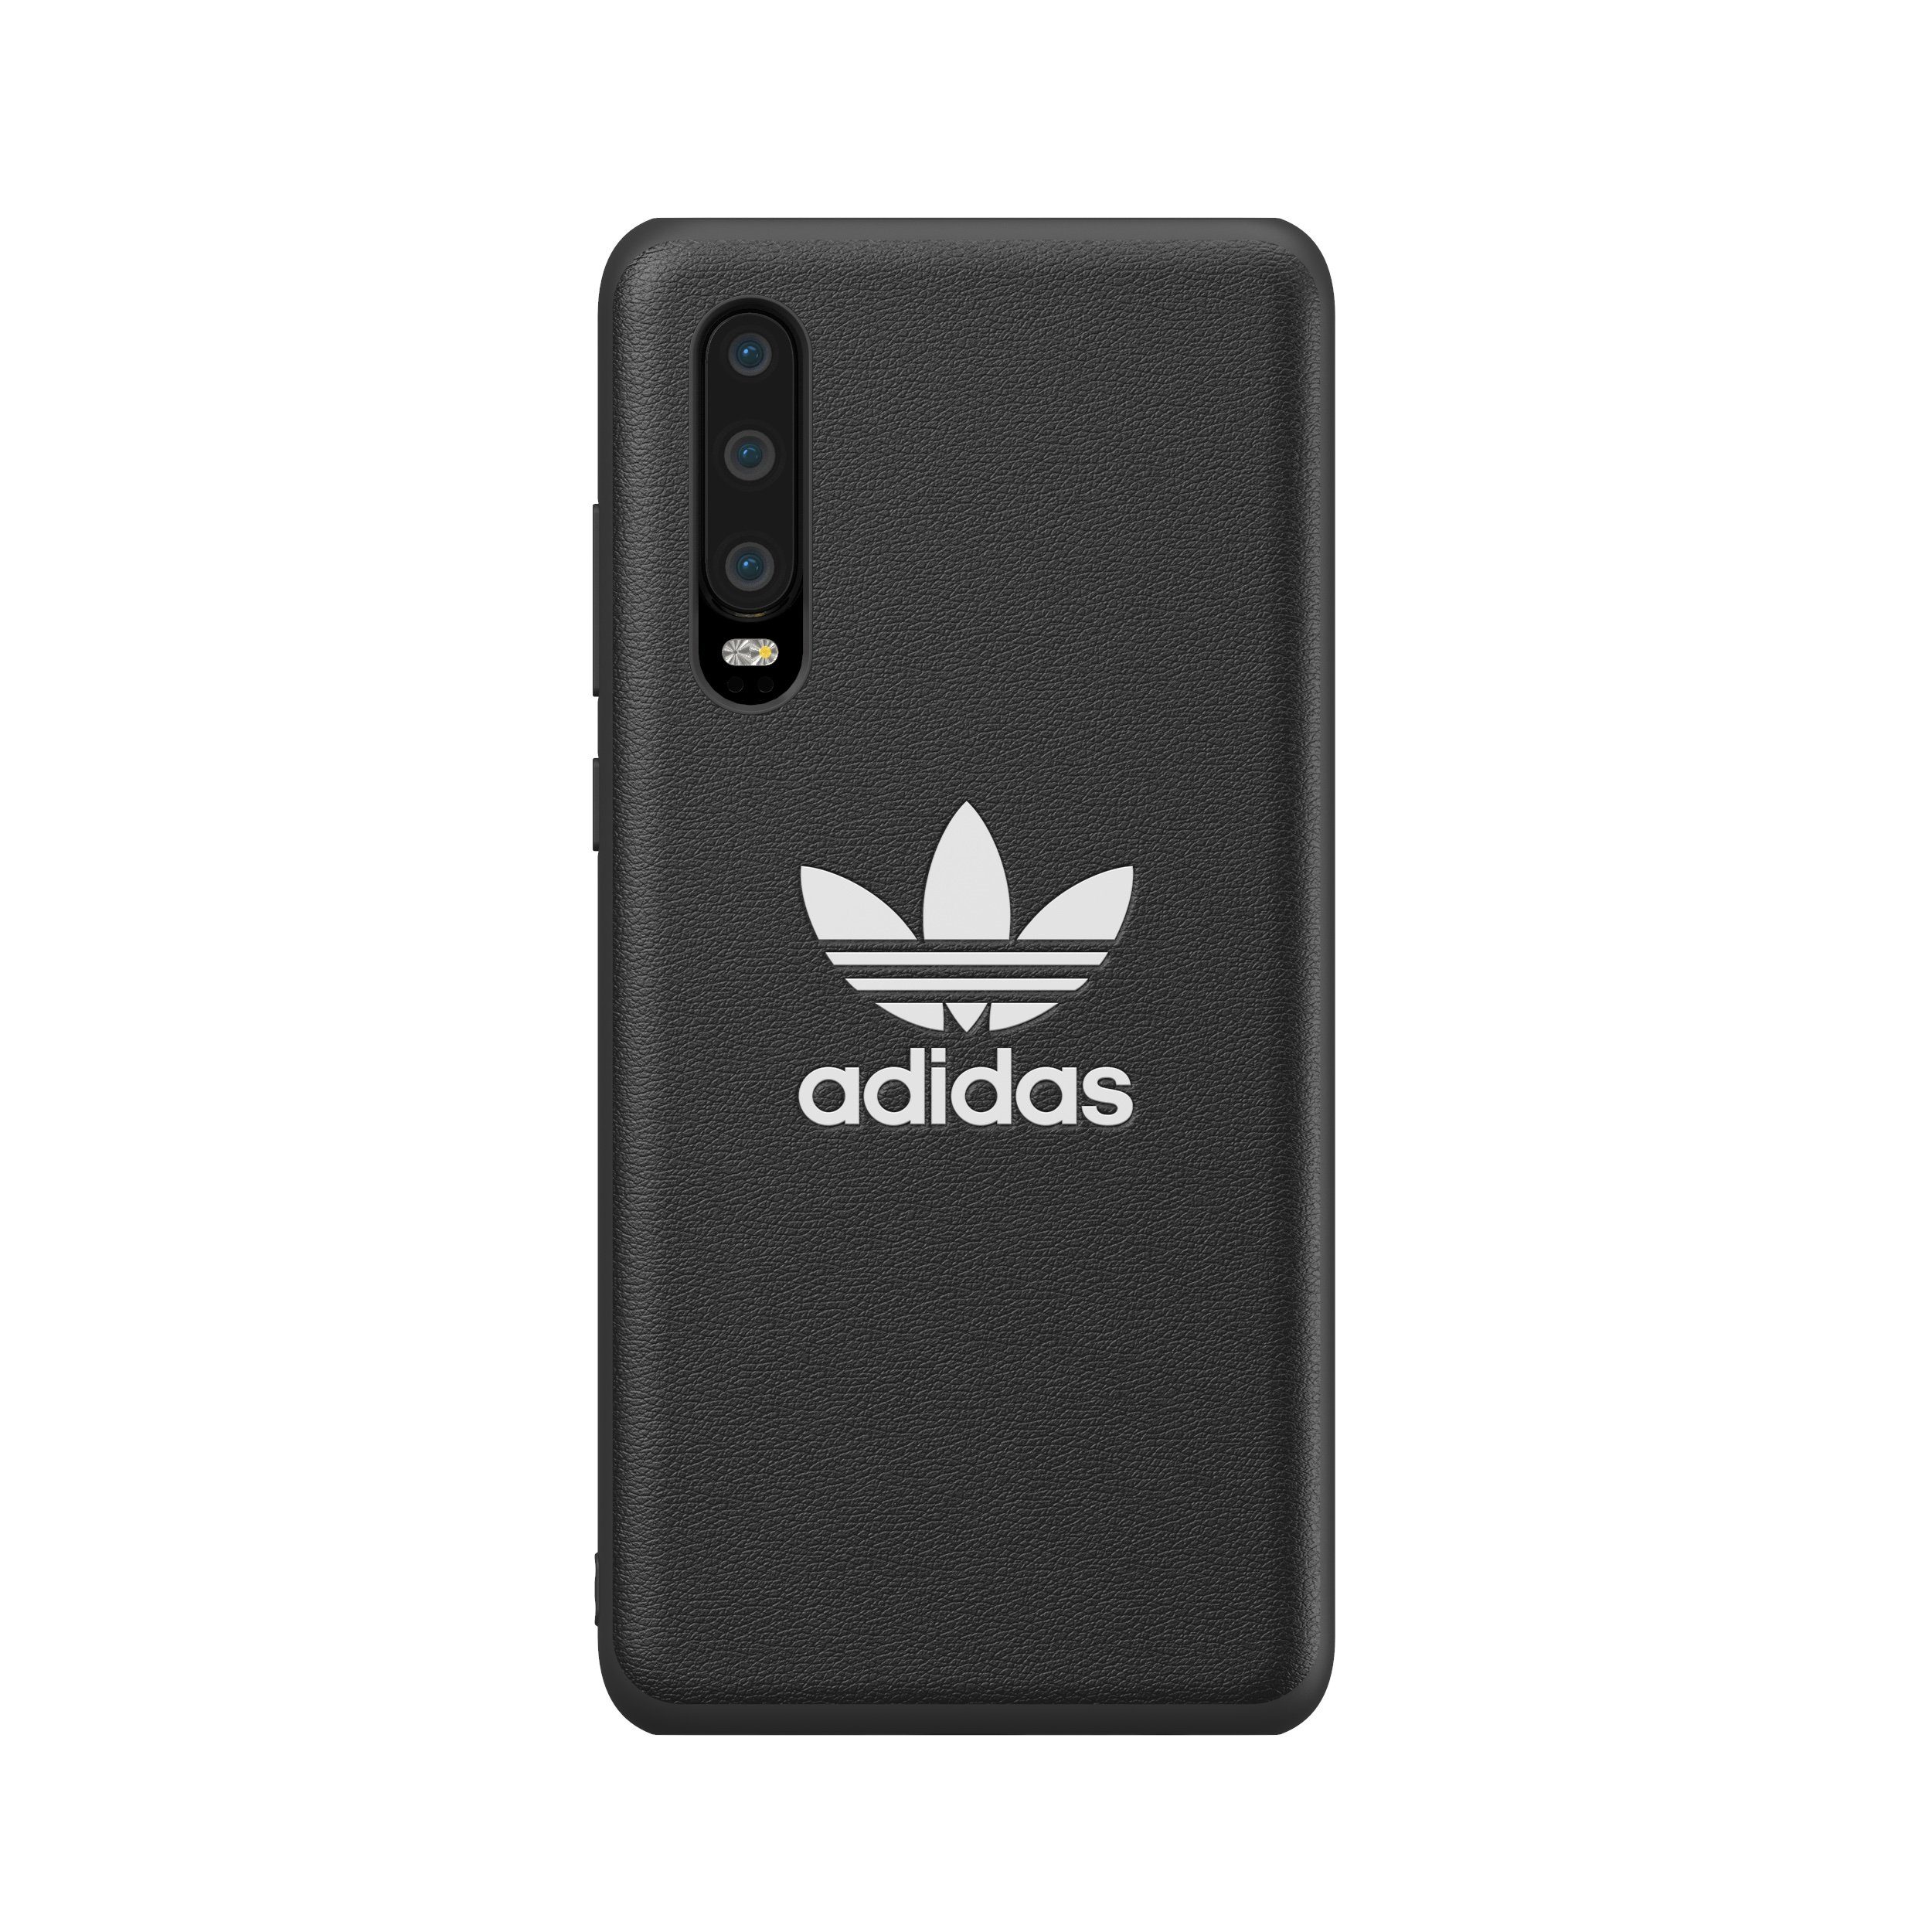 OR case P30 FW19/SS21 Originals BASIC adidas NEW Backcover adidas for Moulded